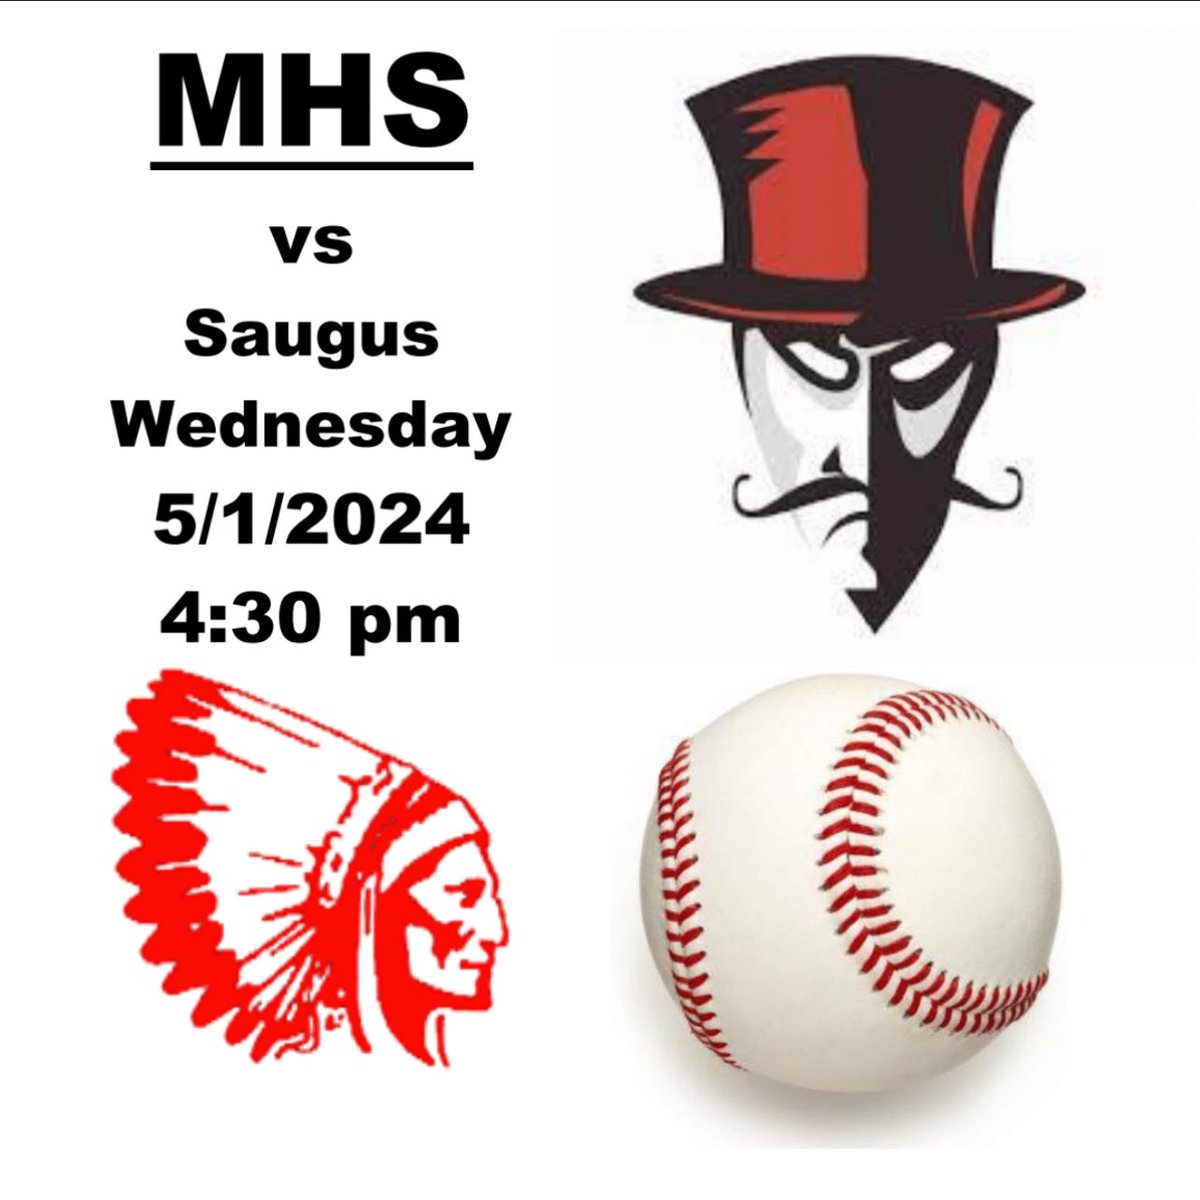 LOCATION CHANGE: Due to unplayable field conditions in Saugus, today’s Varsity baseball game has been moved to Seaside park in Marblehead at 4:30 pm. JV will still travel to Saugus.